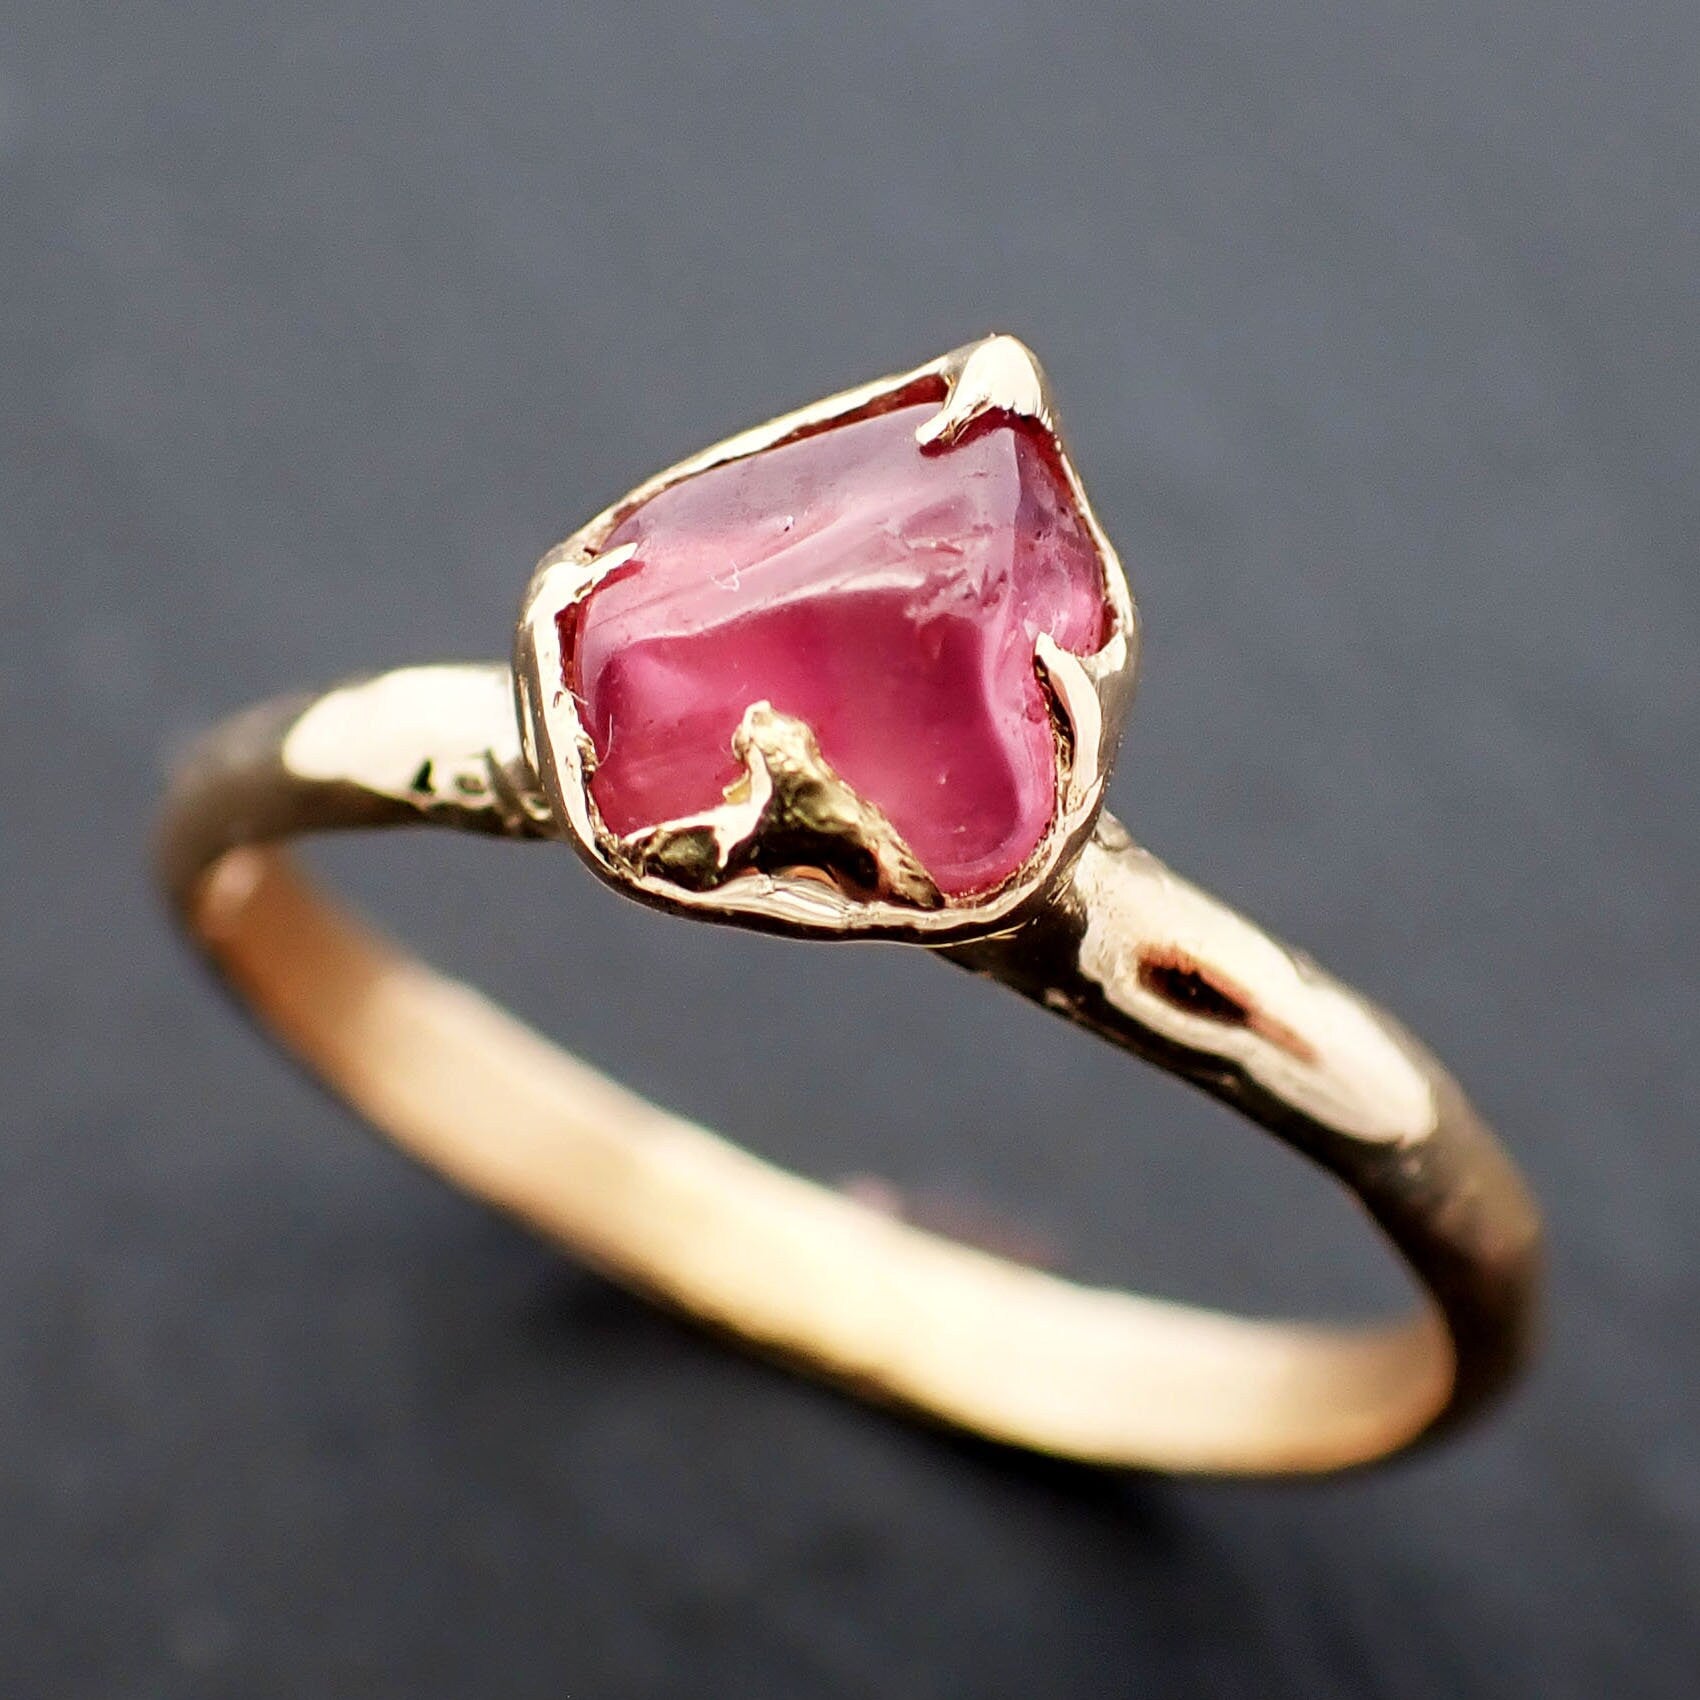 Sapphire tumbled yellow 18k gold Solitaire pink tumbled gemstone ring 3506